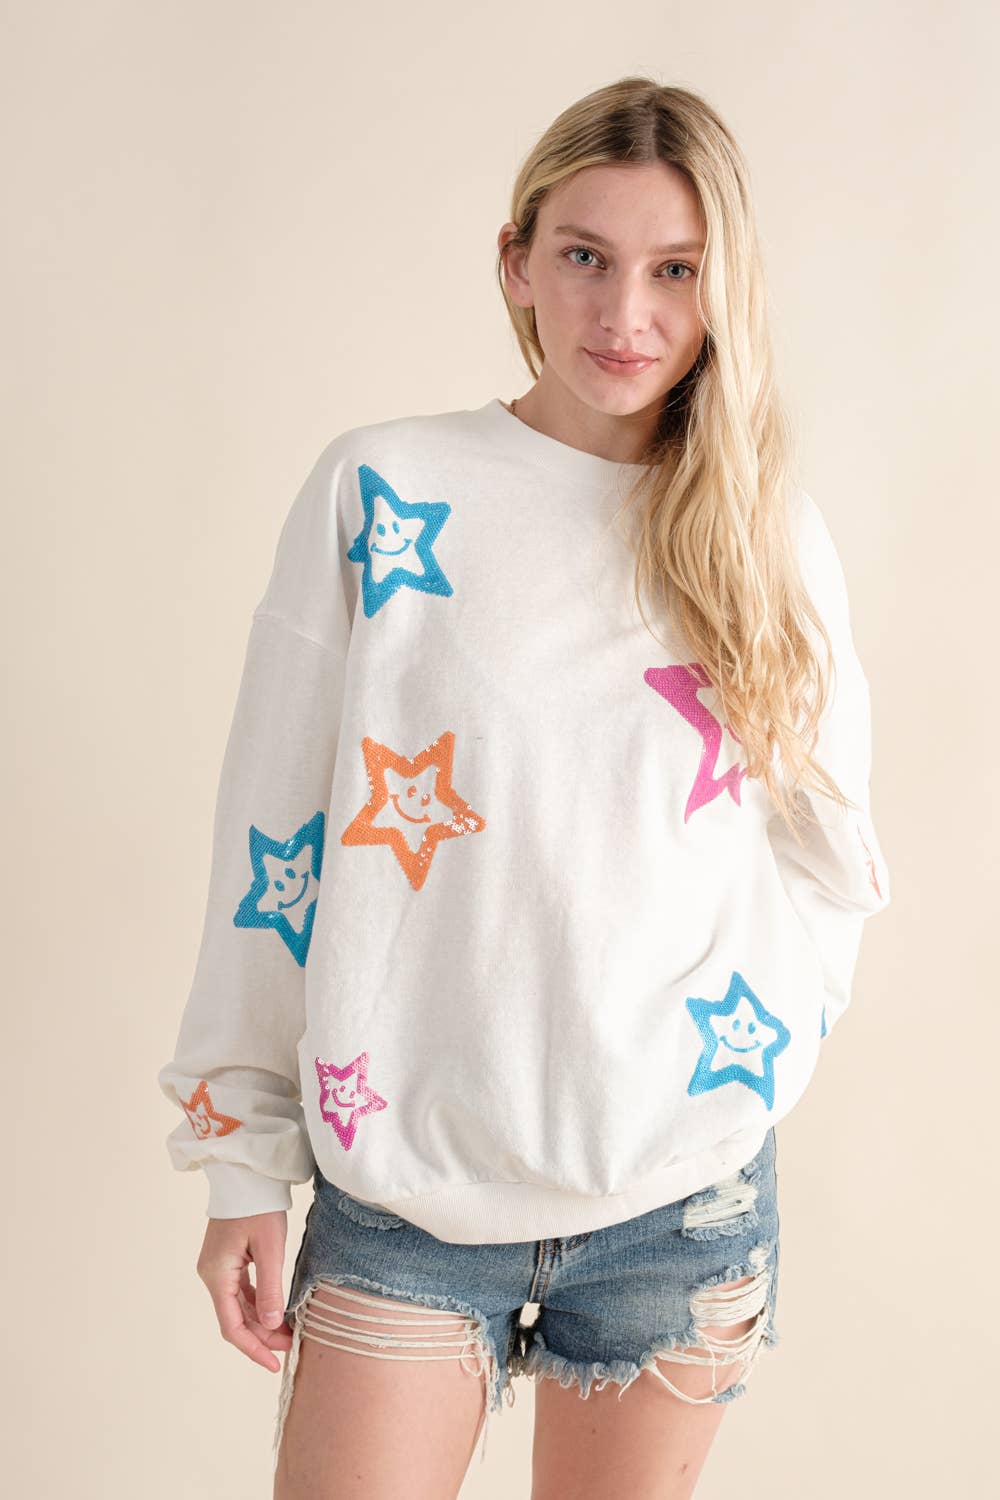 Blue B - 32960T - French Terry Star Sequin Smiley Sweatshirt: M / OFF WHITE